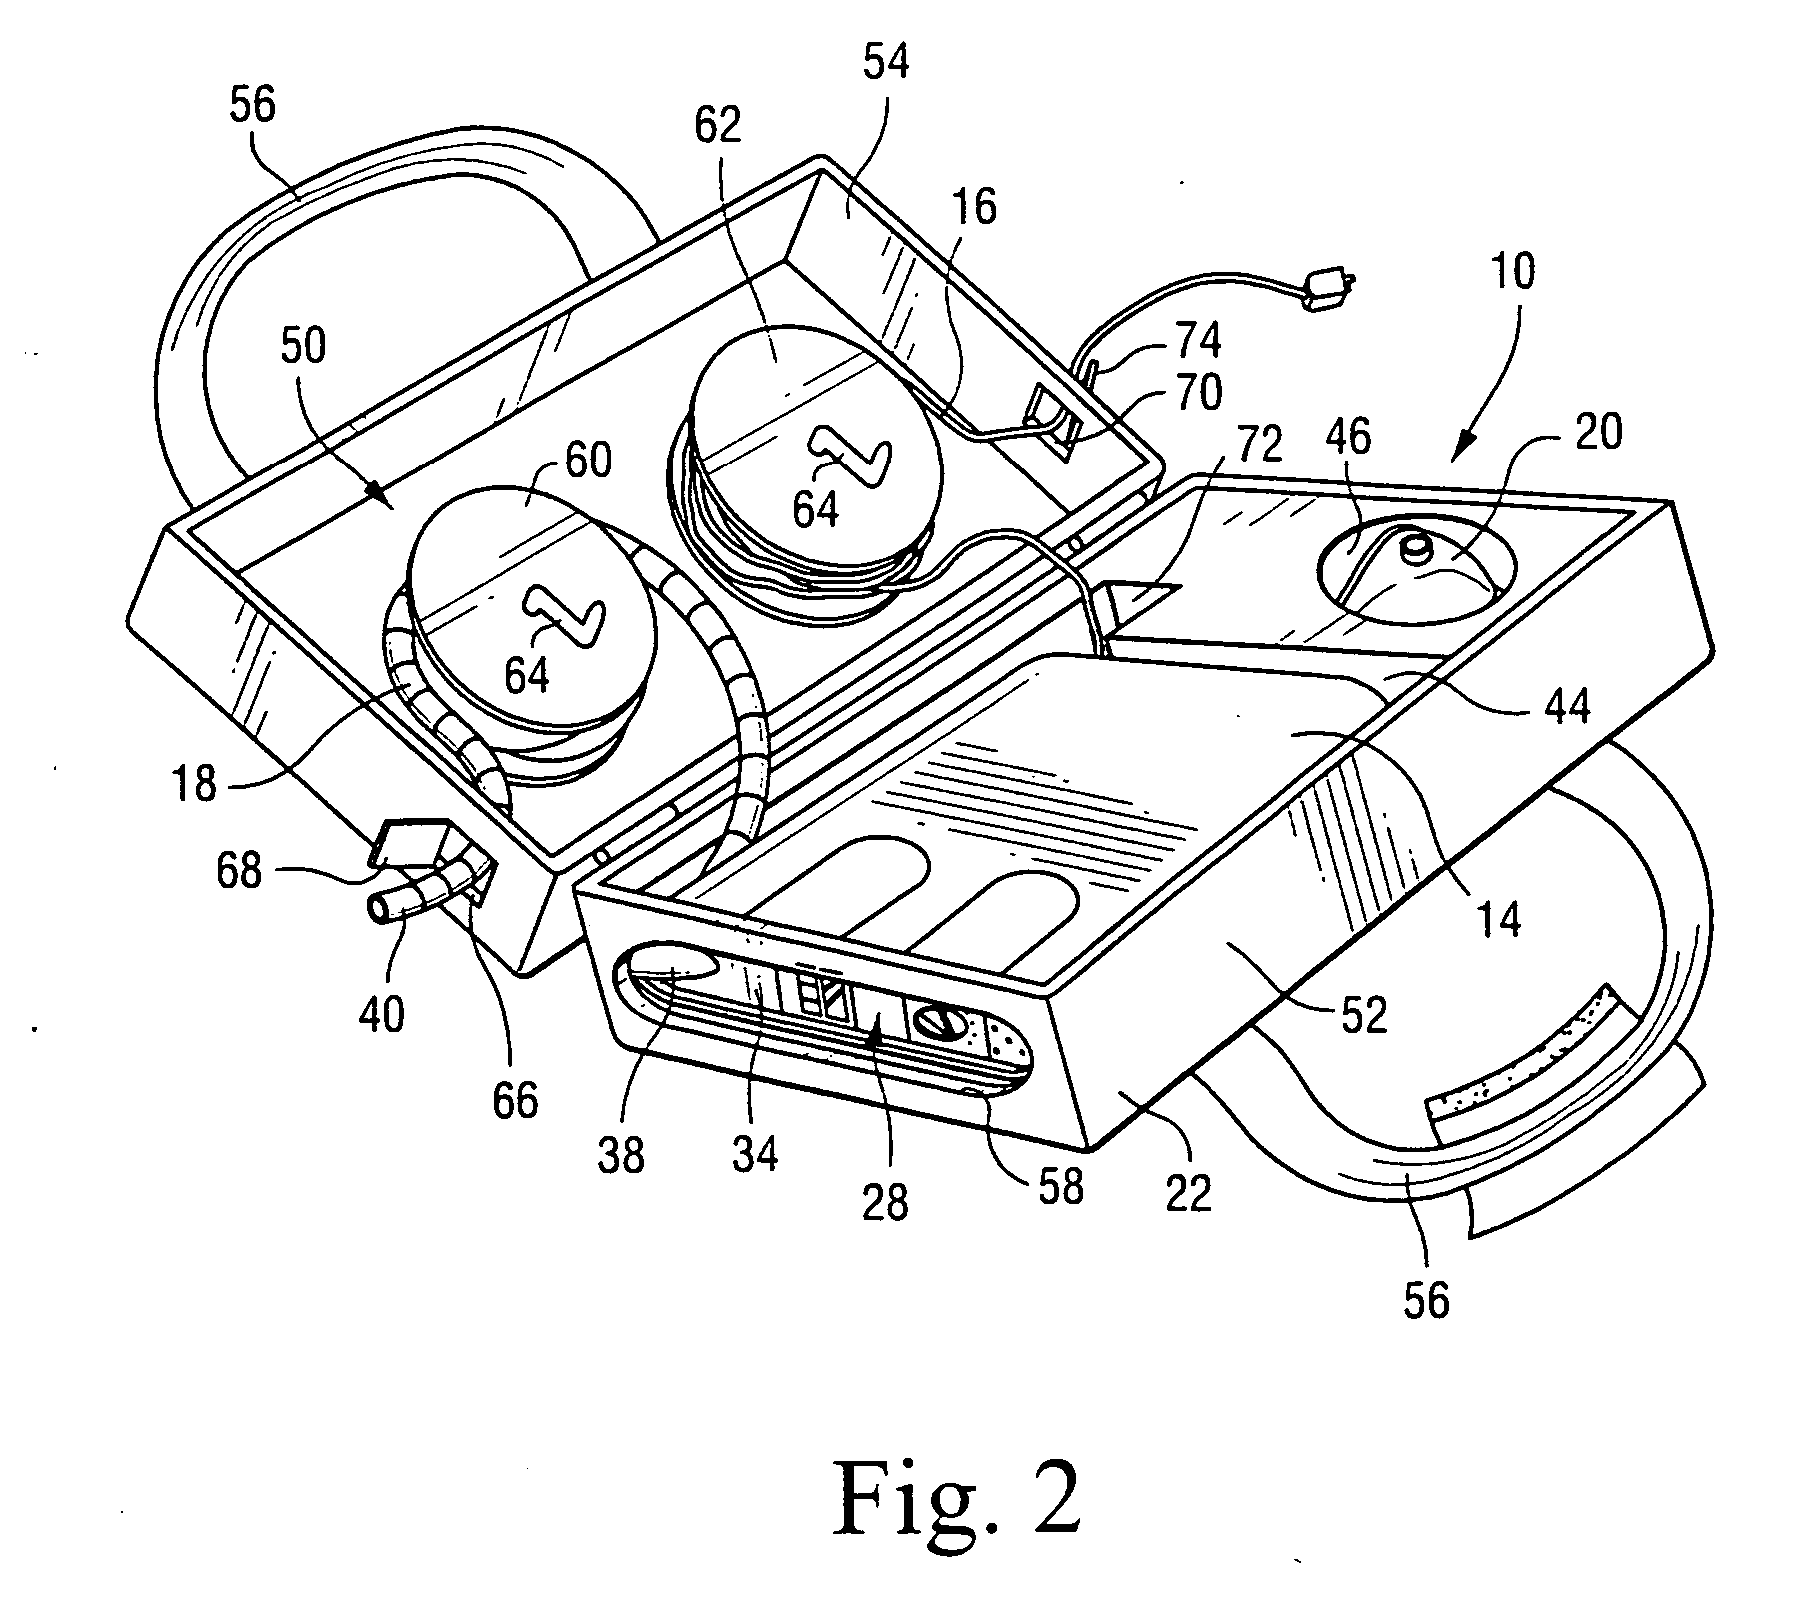 Storage system for an apparatus that delivers breathable gas to a patient